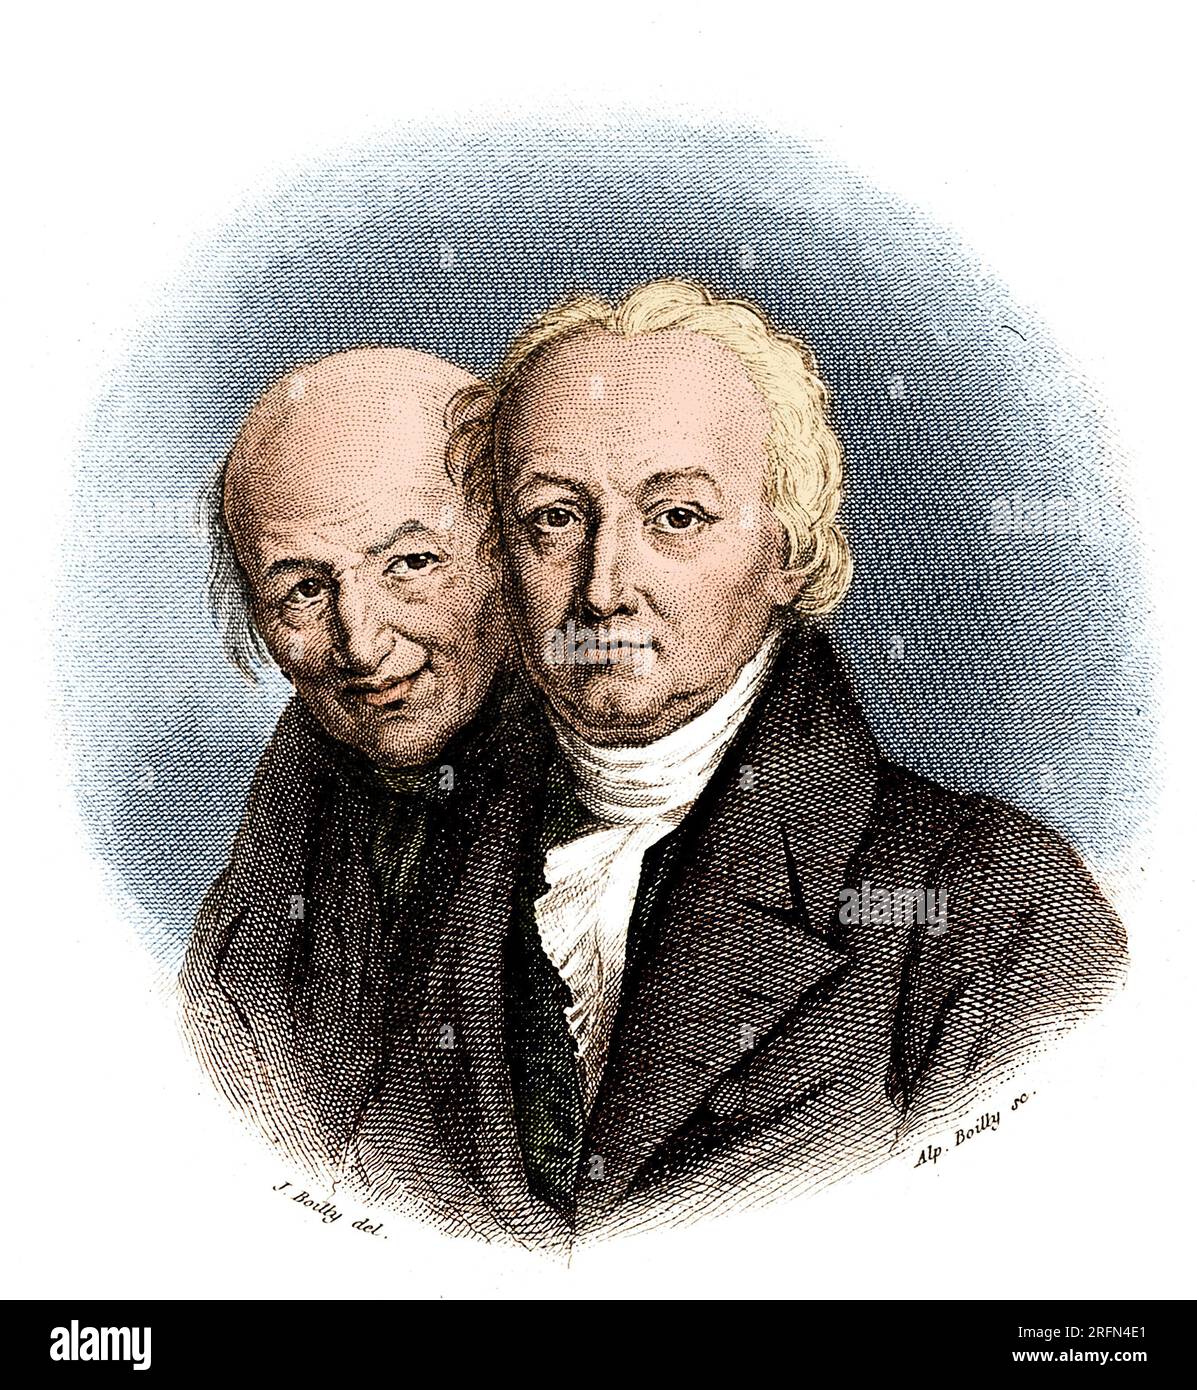 Brothers Rene-Just Hauy (left) and Valentin Hauy. Engraving by A. Boilly after J. Boilly, 19th century. Valentin Hauy (1745-1822) established the first school for the blind in 1785 in Paris. Rene Just Hauy (1743-1822) was a priest and mineralogist, considered the father of modern crystallography. Colorized. Stock Photo